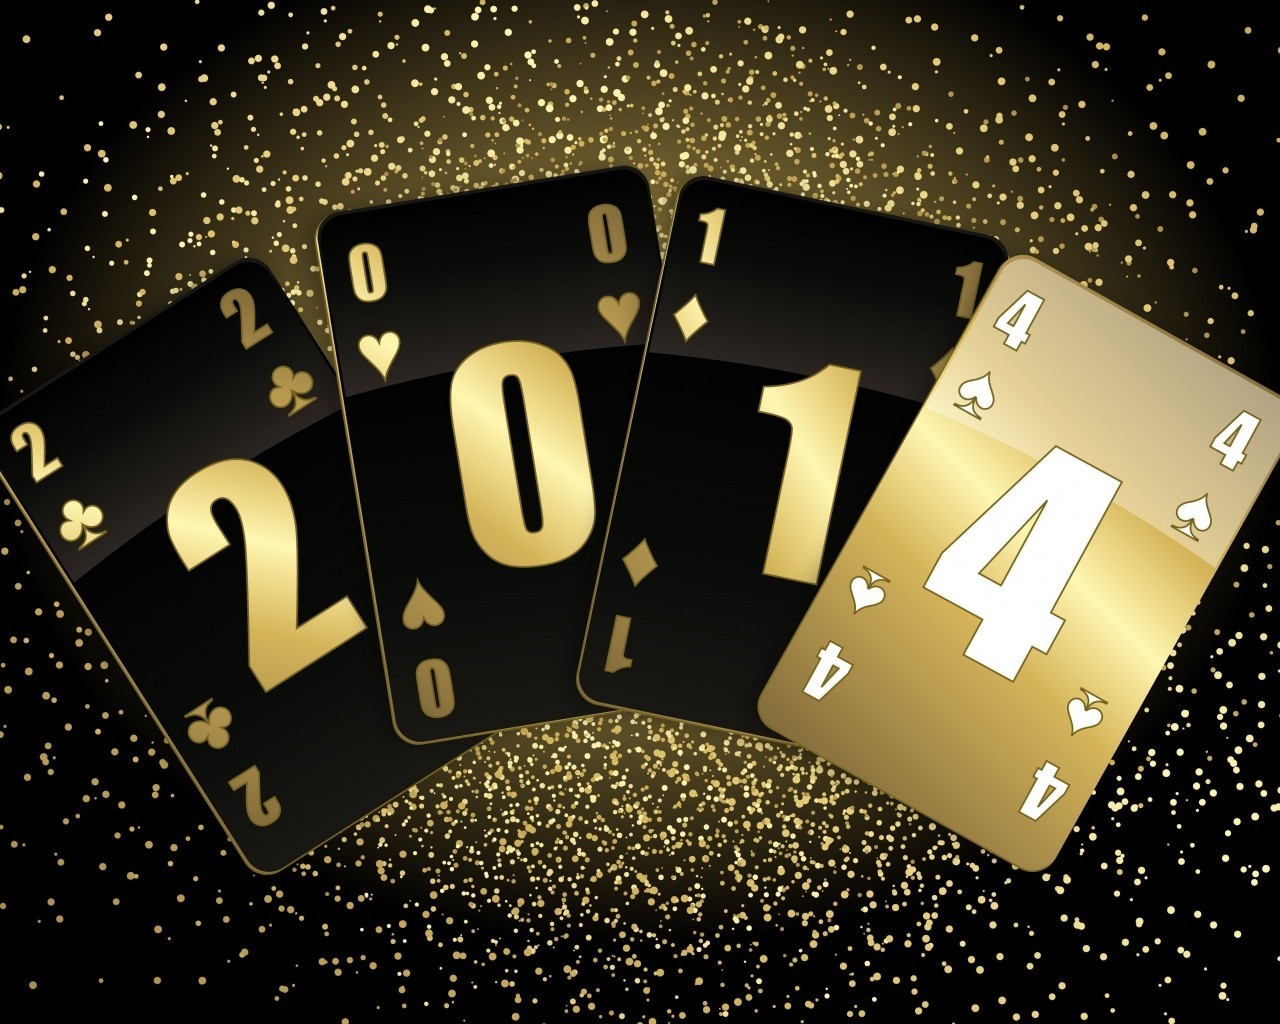 2014 Cards for 1280 x 1024 resolution